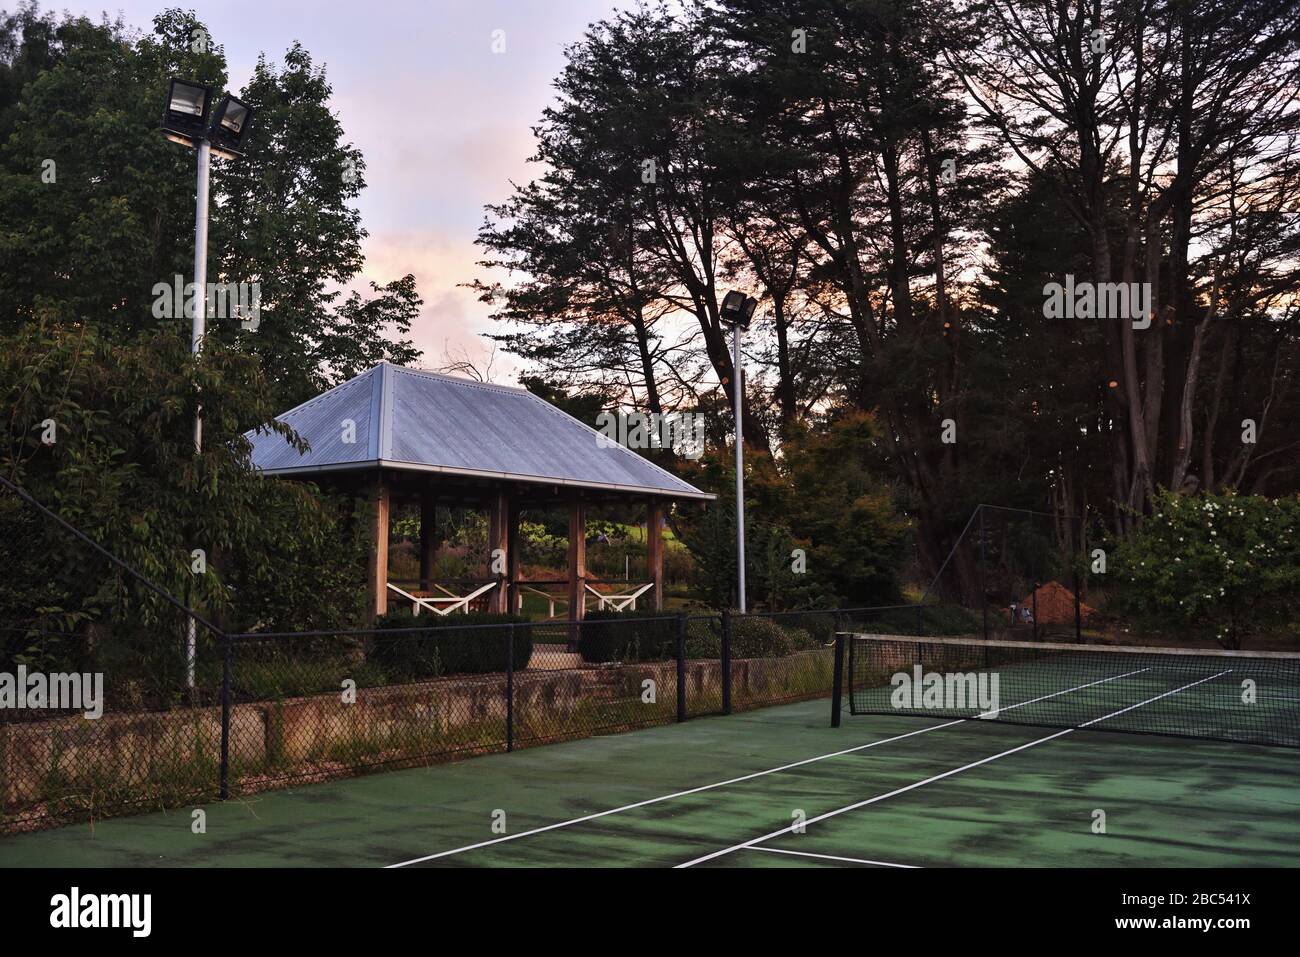 Old tennis court in a country house garden, late afternoon Mittagong, Southern Highlands, Australia Stock Photo